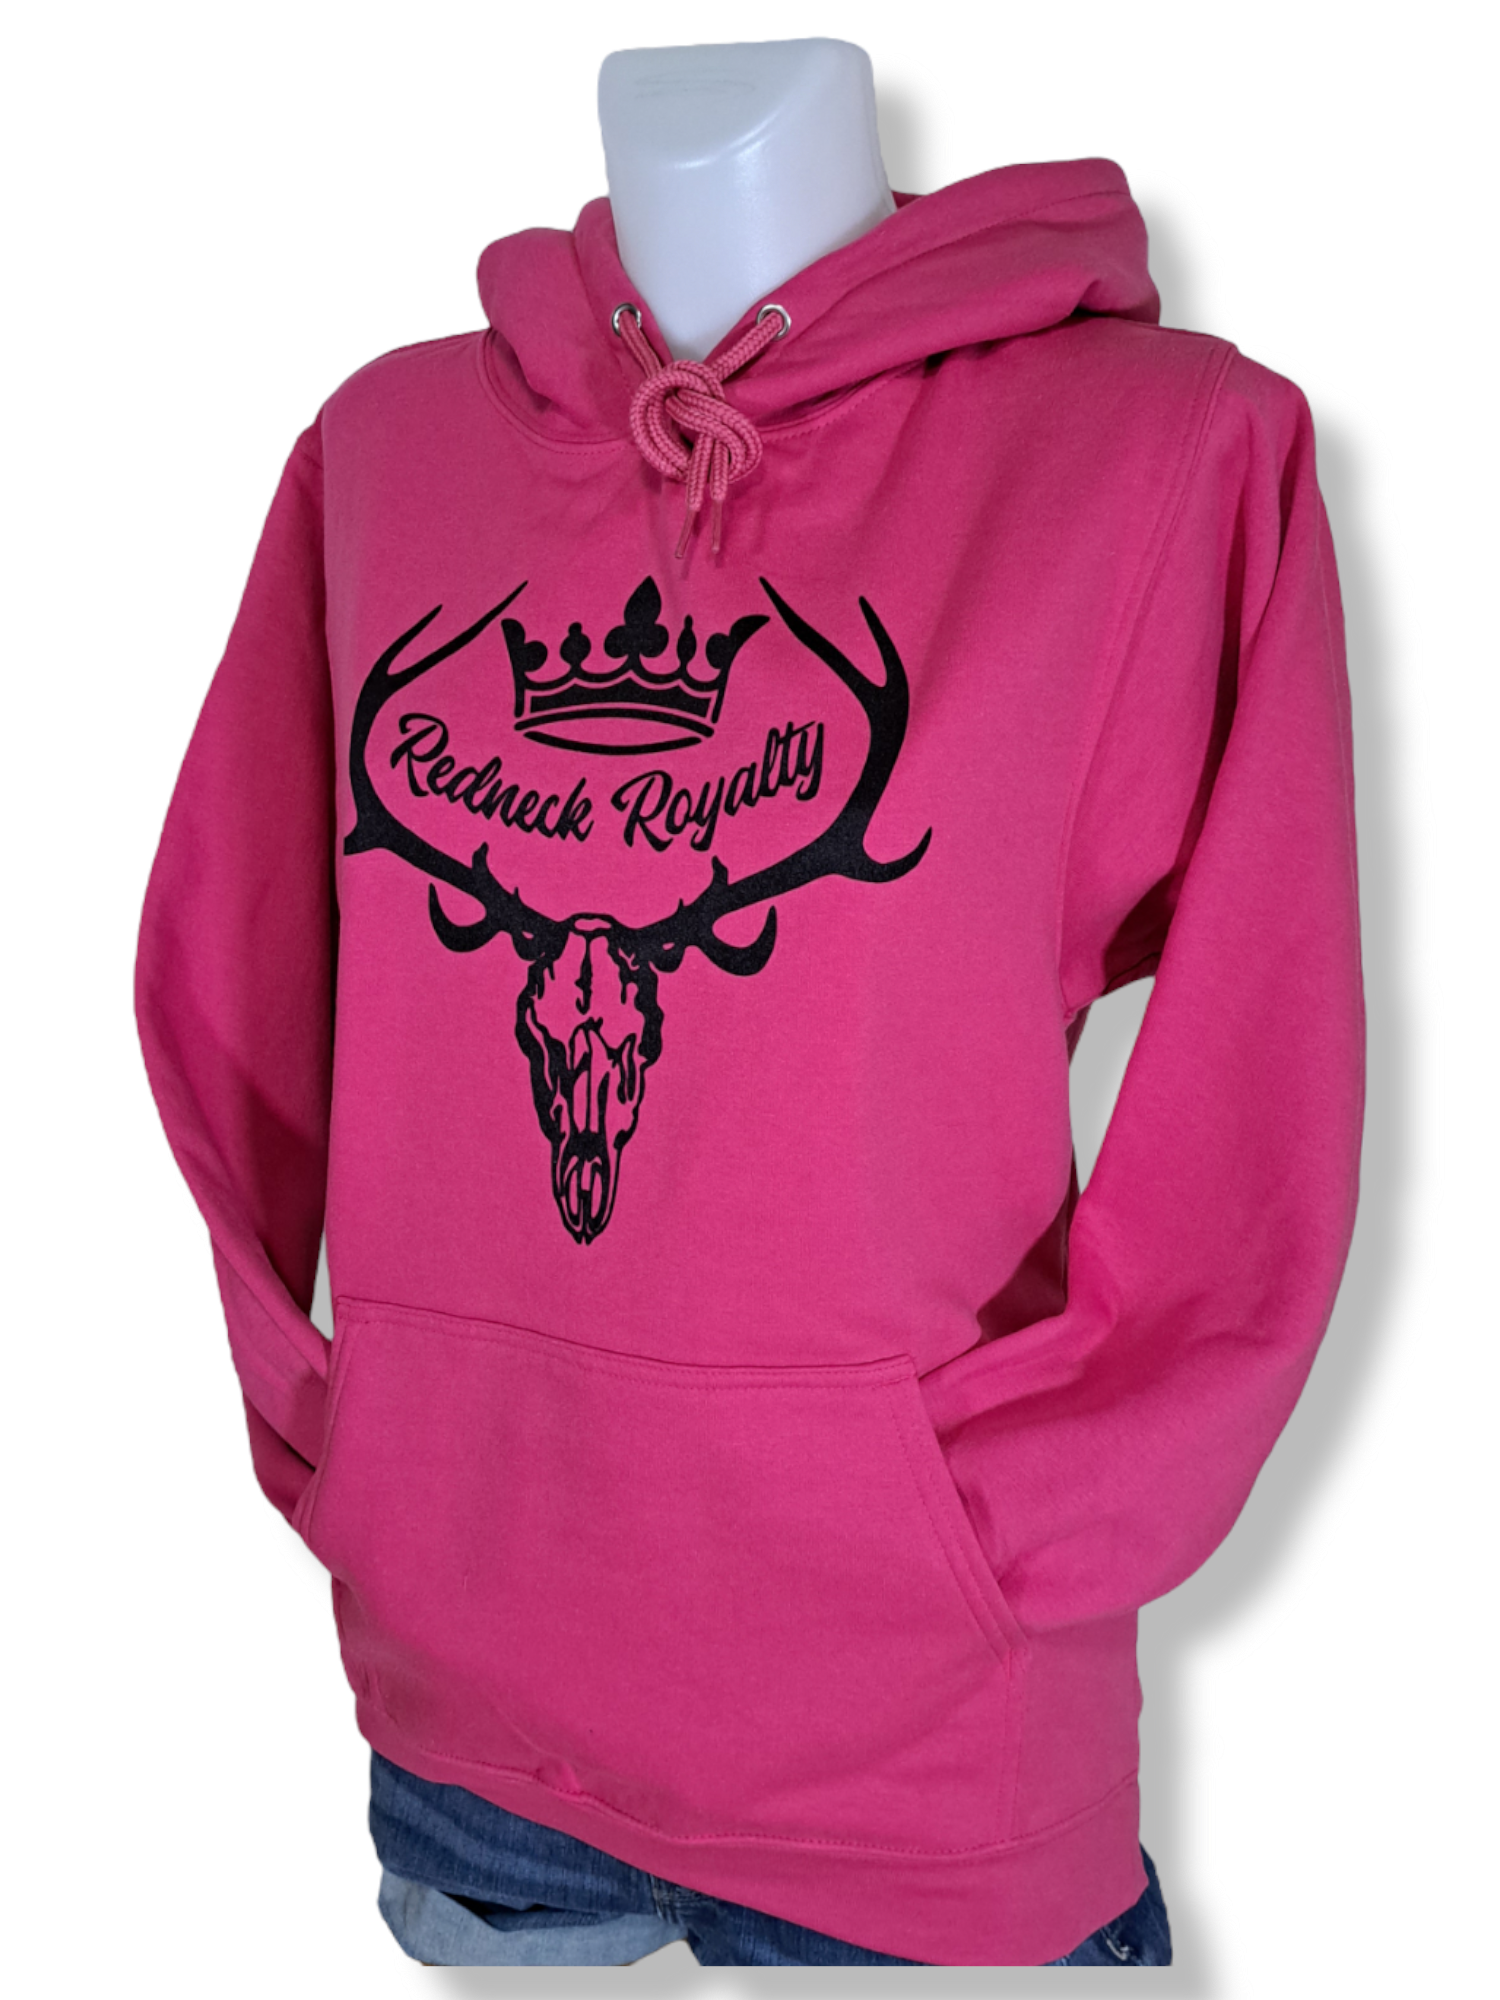 Look Pretty Play Dirty Hoodie  Neon Pink – Luckless Outfitters